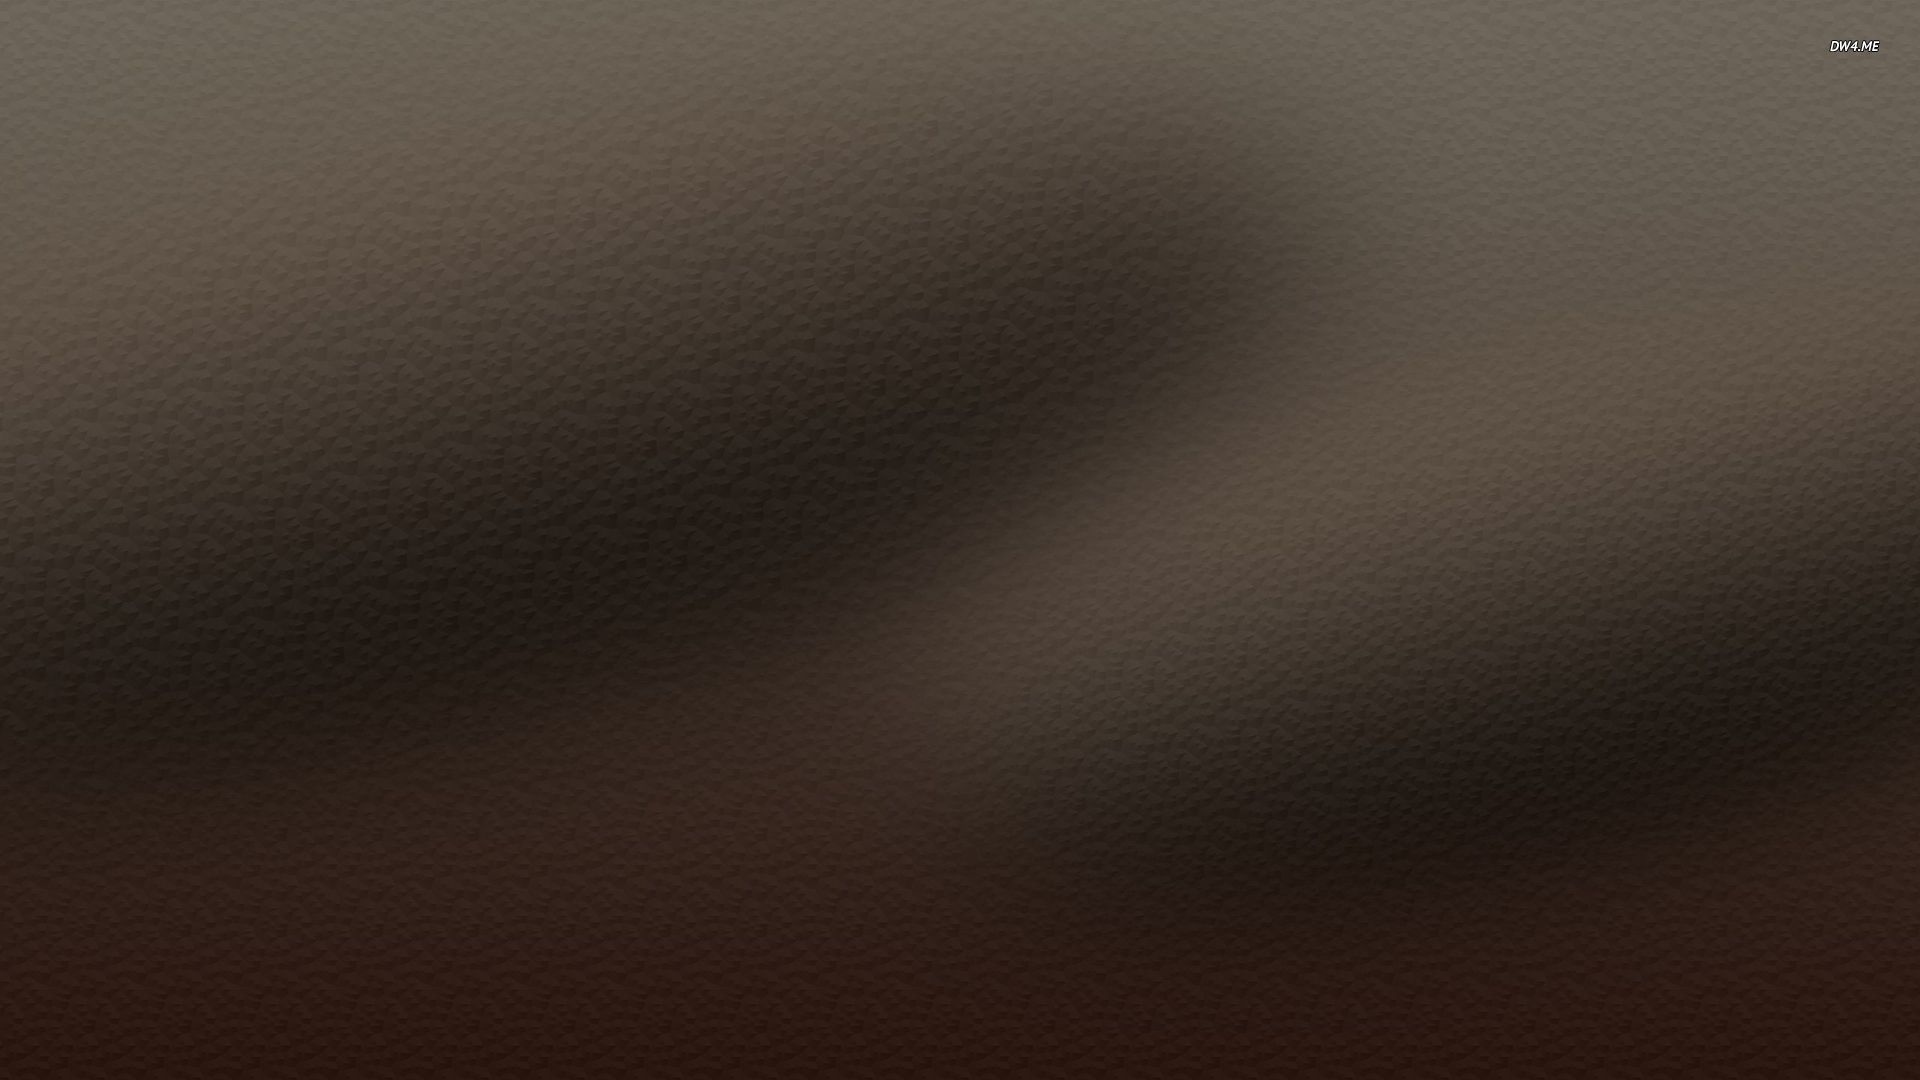 Brown leather wallpaper   Minimalistic wallpapers   169